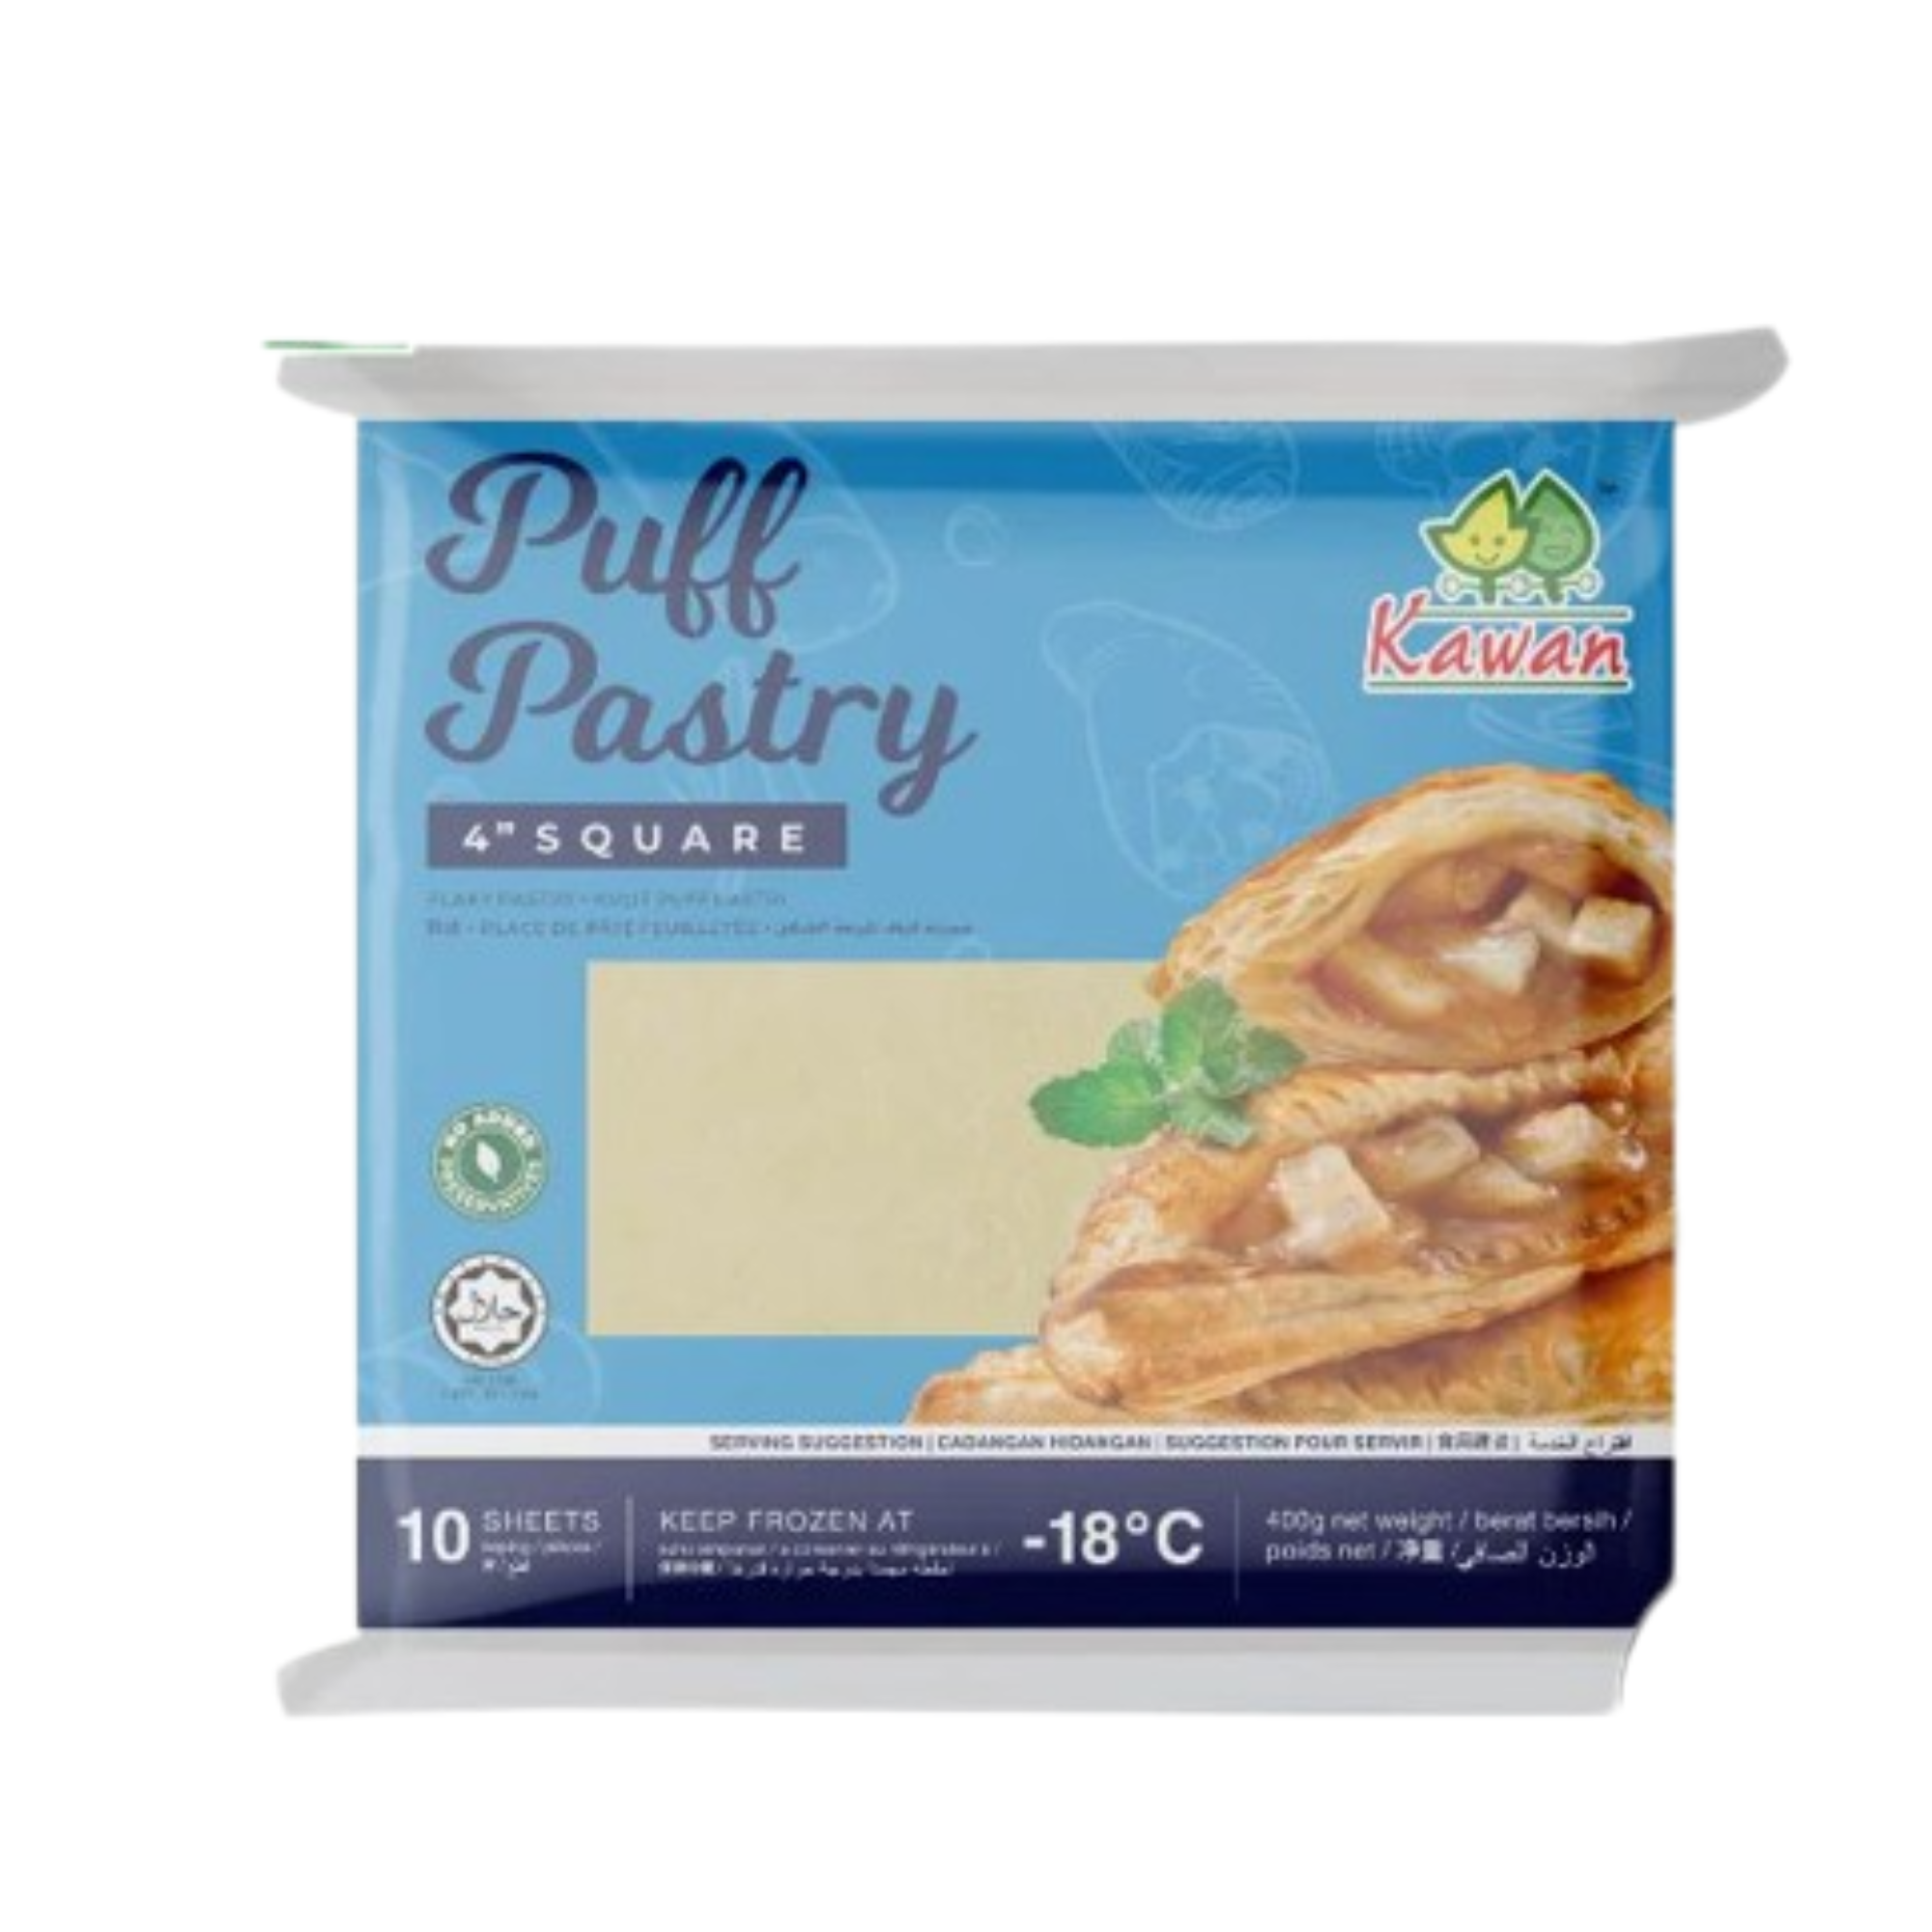 https://ascona.com.ph/wp-content/uploads/2022/03/PUFF-PASTRY-4_-SQUARE-PHP-178.png